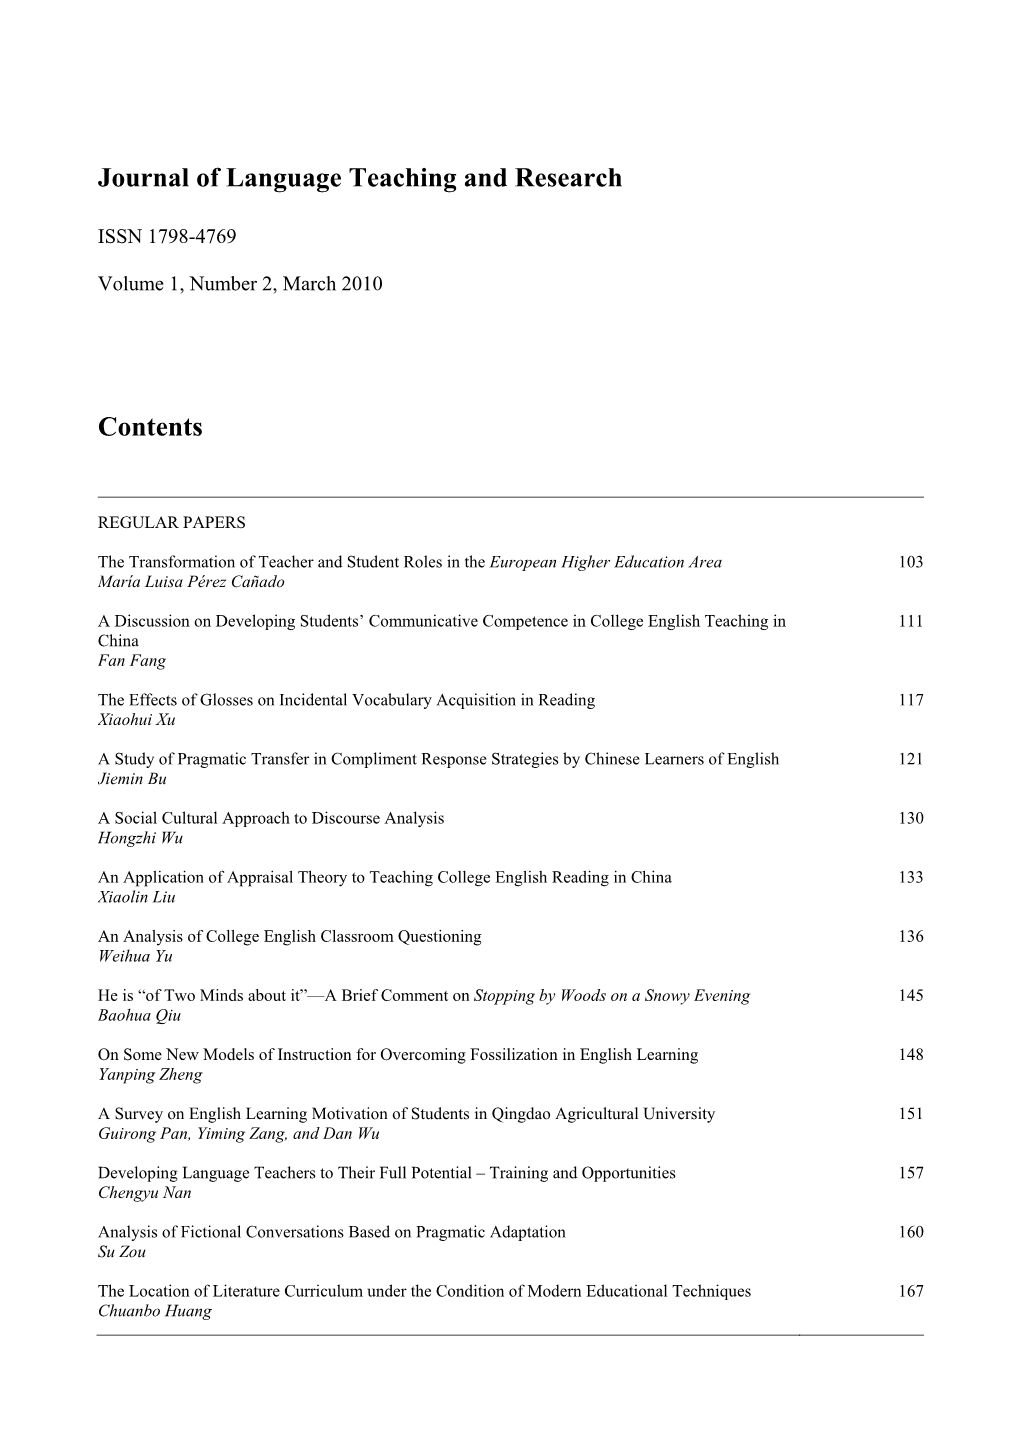 Journal of Language Teaching and Research Contents